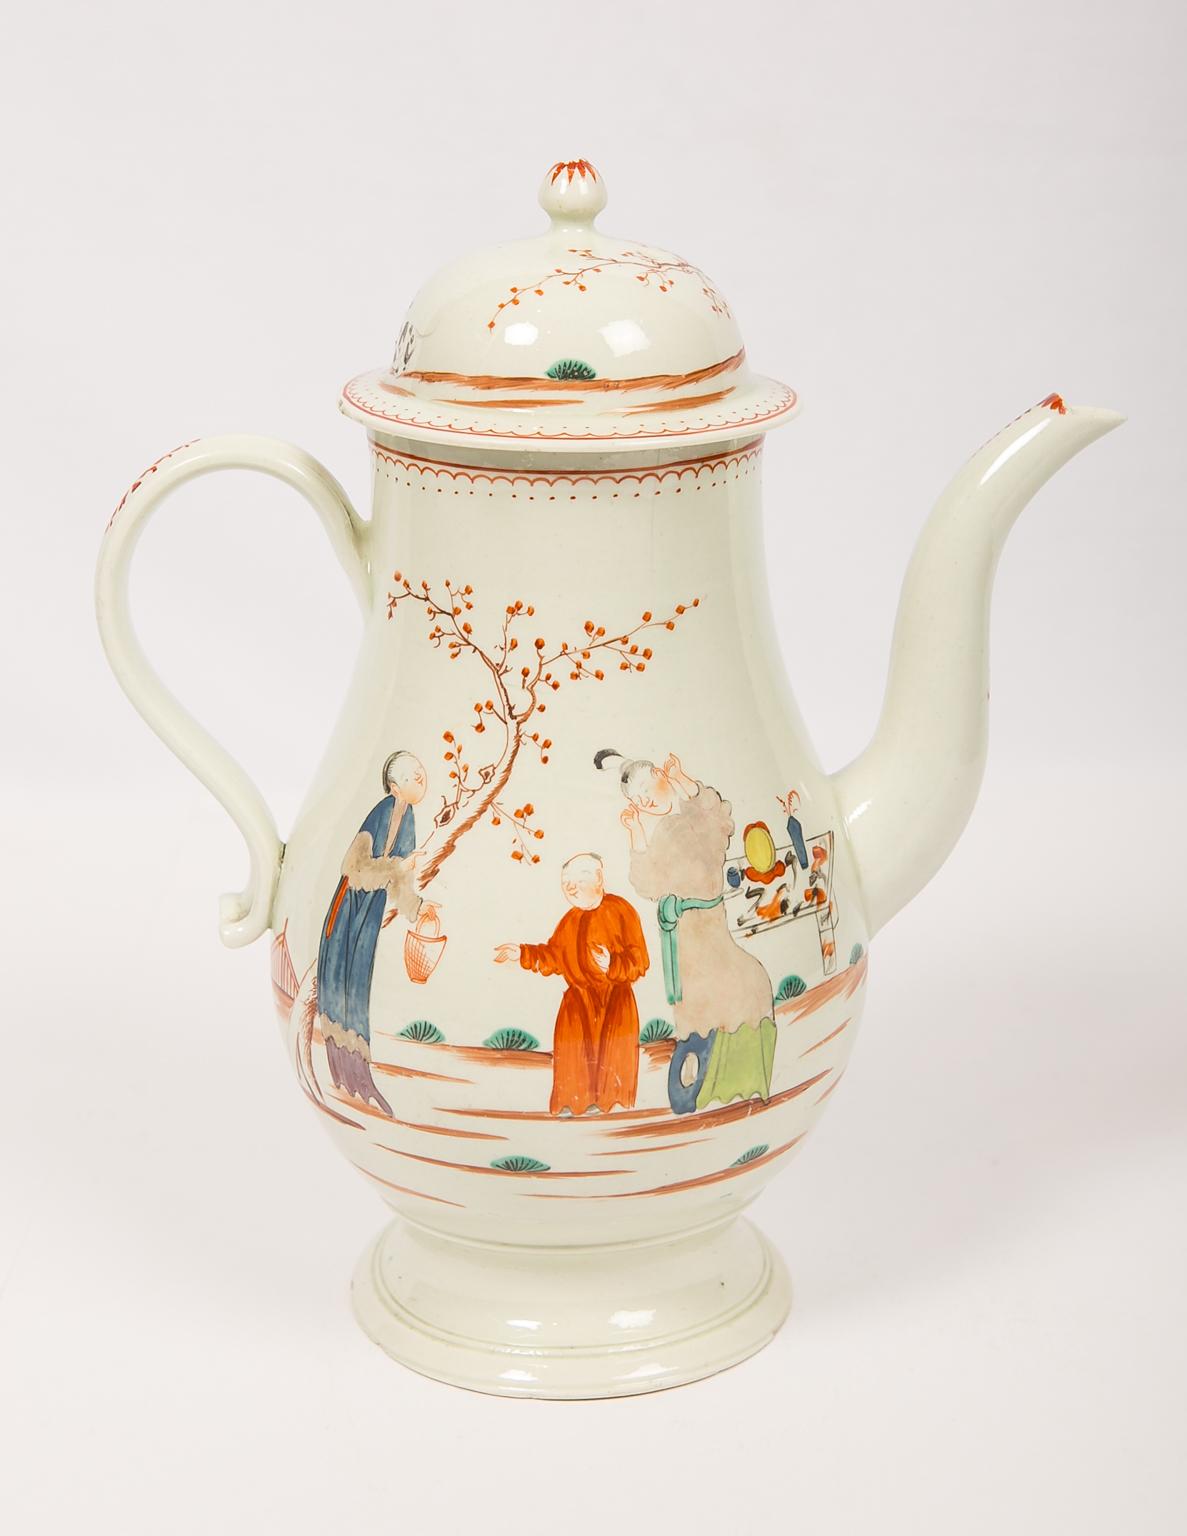 We are pleased to offer this rare Liverpool soft-paste porcelain coffee pot made in England in the late 18th century, circa 1785. 
The pot is painted with a lovely chinoiserie scene on both sides of the body. In the scene, a lady stands in front of